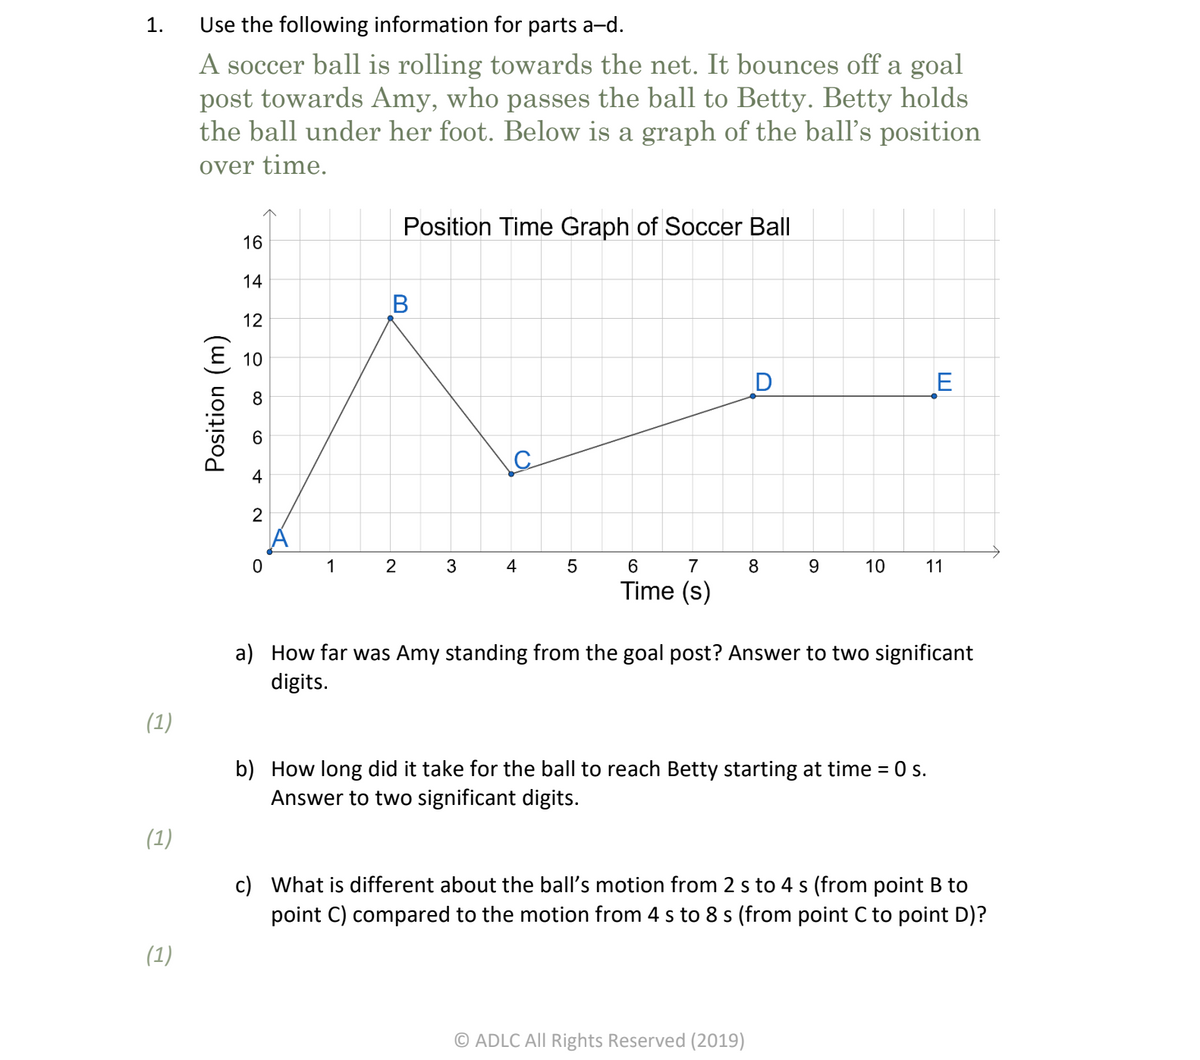 1.
Use the following information for parts a-d.
A soccer ball is rolling towards the net. It bounces off a goal
post towards Amy, who passes the ball to Betty. Betty holds
the ball under her foot. Below is a graph of the ball's position
over time.
Position Time Graph of Soccer Ball
16
14
B
12
10
E
6.
4
2
1
2
4
6.
7
9.
10
11
Time (s)
a) How far was Amy standing from the goal post? Answer to two significant
digits.
(1)
b) How long did it take for the ball to reach Betty starting at time = 0 s.
Answer to two significant digits.
(1)
c) What is different about the ball's motion from 2 s to 4 s (from point B to
point C) compared to the motion from 4 s to 8 s (from point C to point D)?
(1)
© ADLC All Rights Reserved (2019)
Position (m)
5
